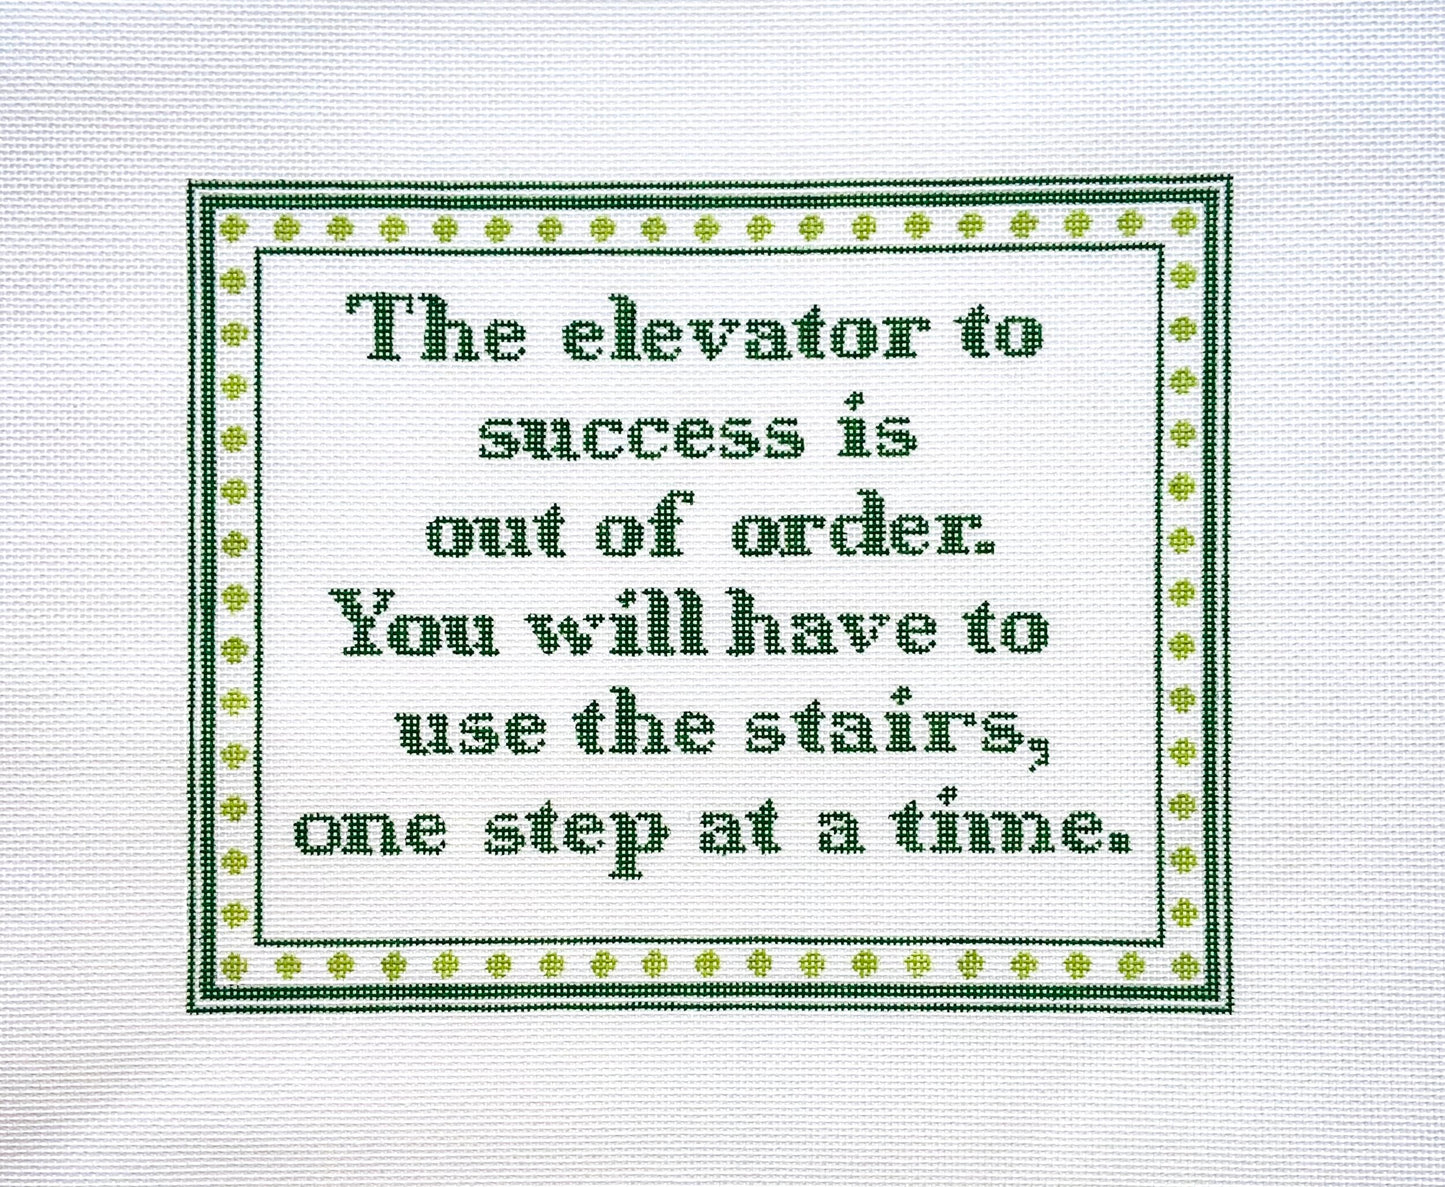 Elevator to Success - Green